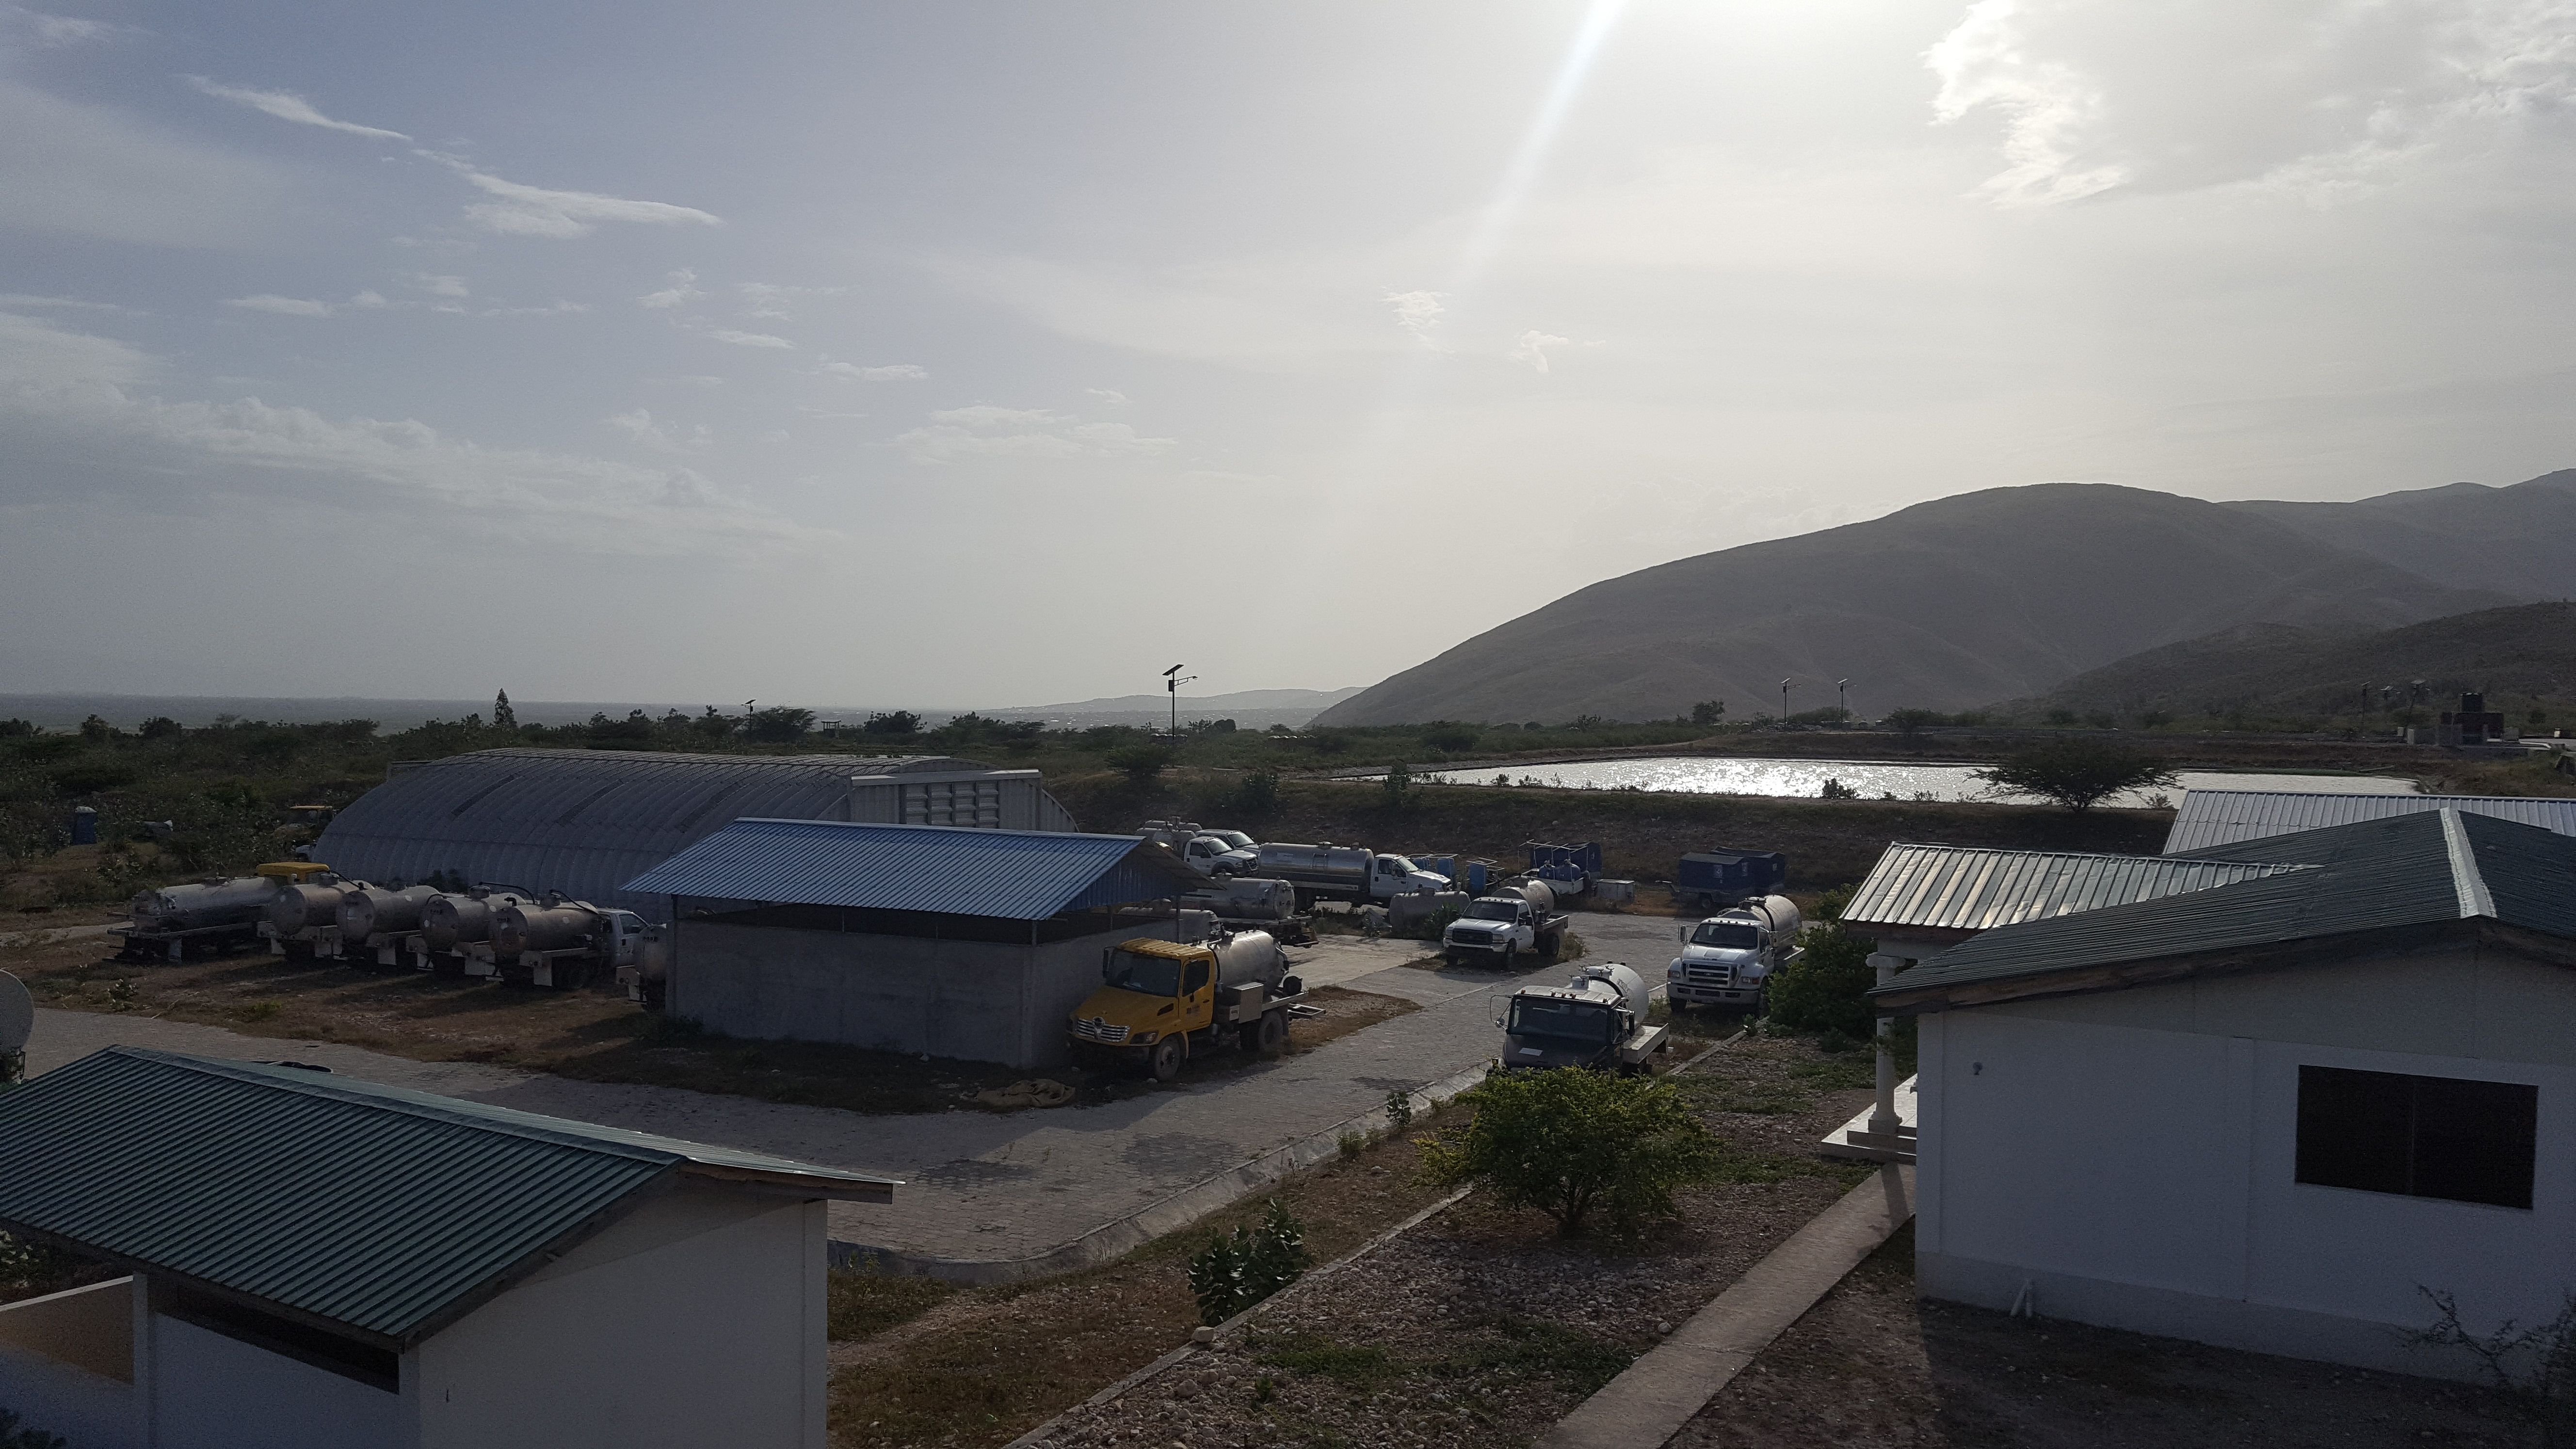 The sewage treatment site at Morne a Cabrit is run by the Haitian government. It is currently the only such facility in a country of about 10 million people. Image by Rebecca Hersher. Haiti, 2017.